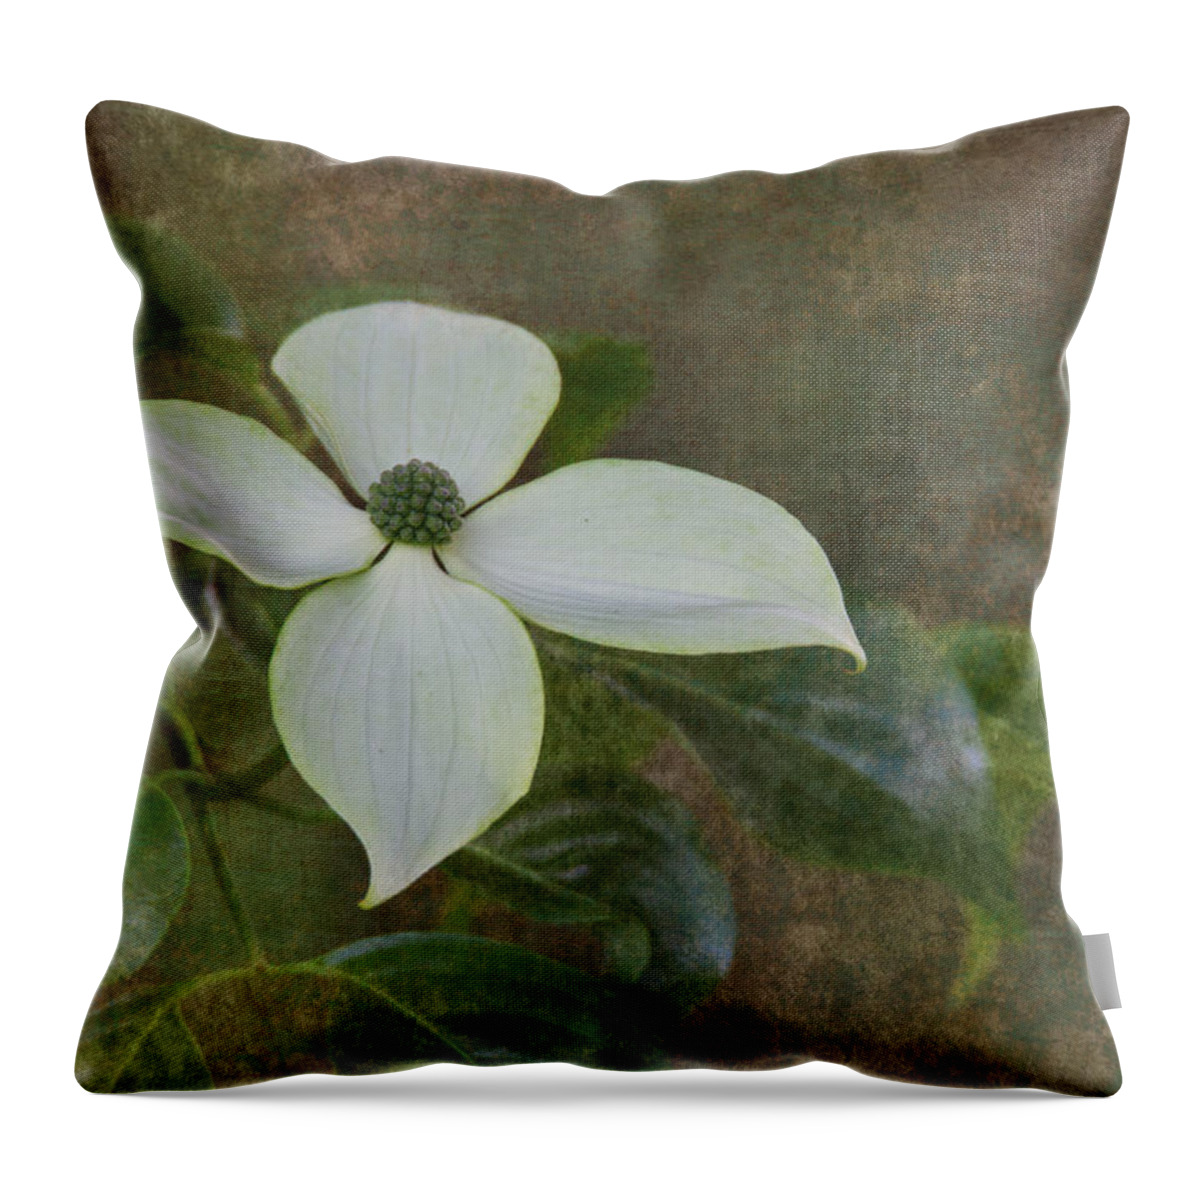 Dogwood Throw Pillow featuring the photograph White Dogwood by Angie Vogel